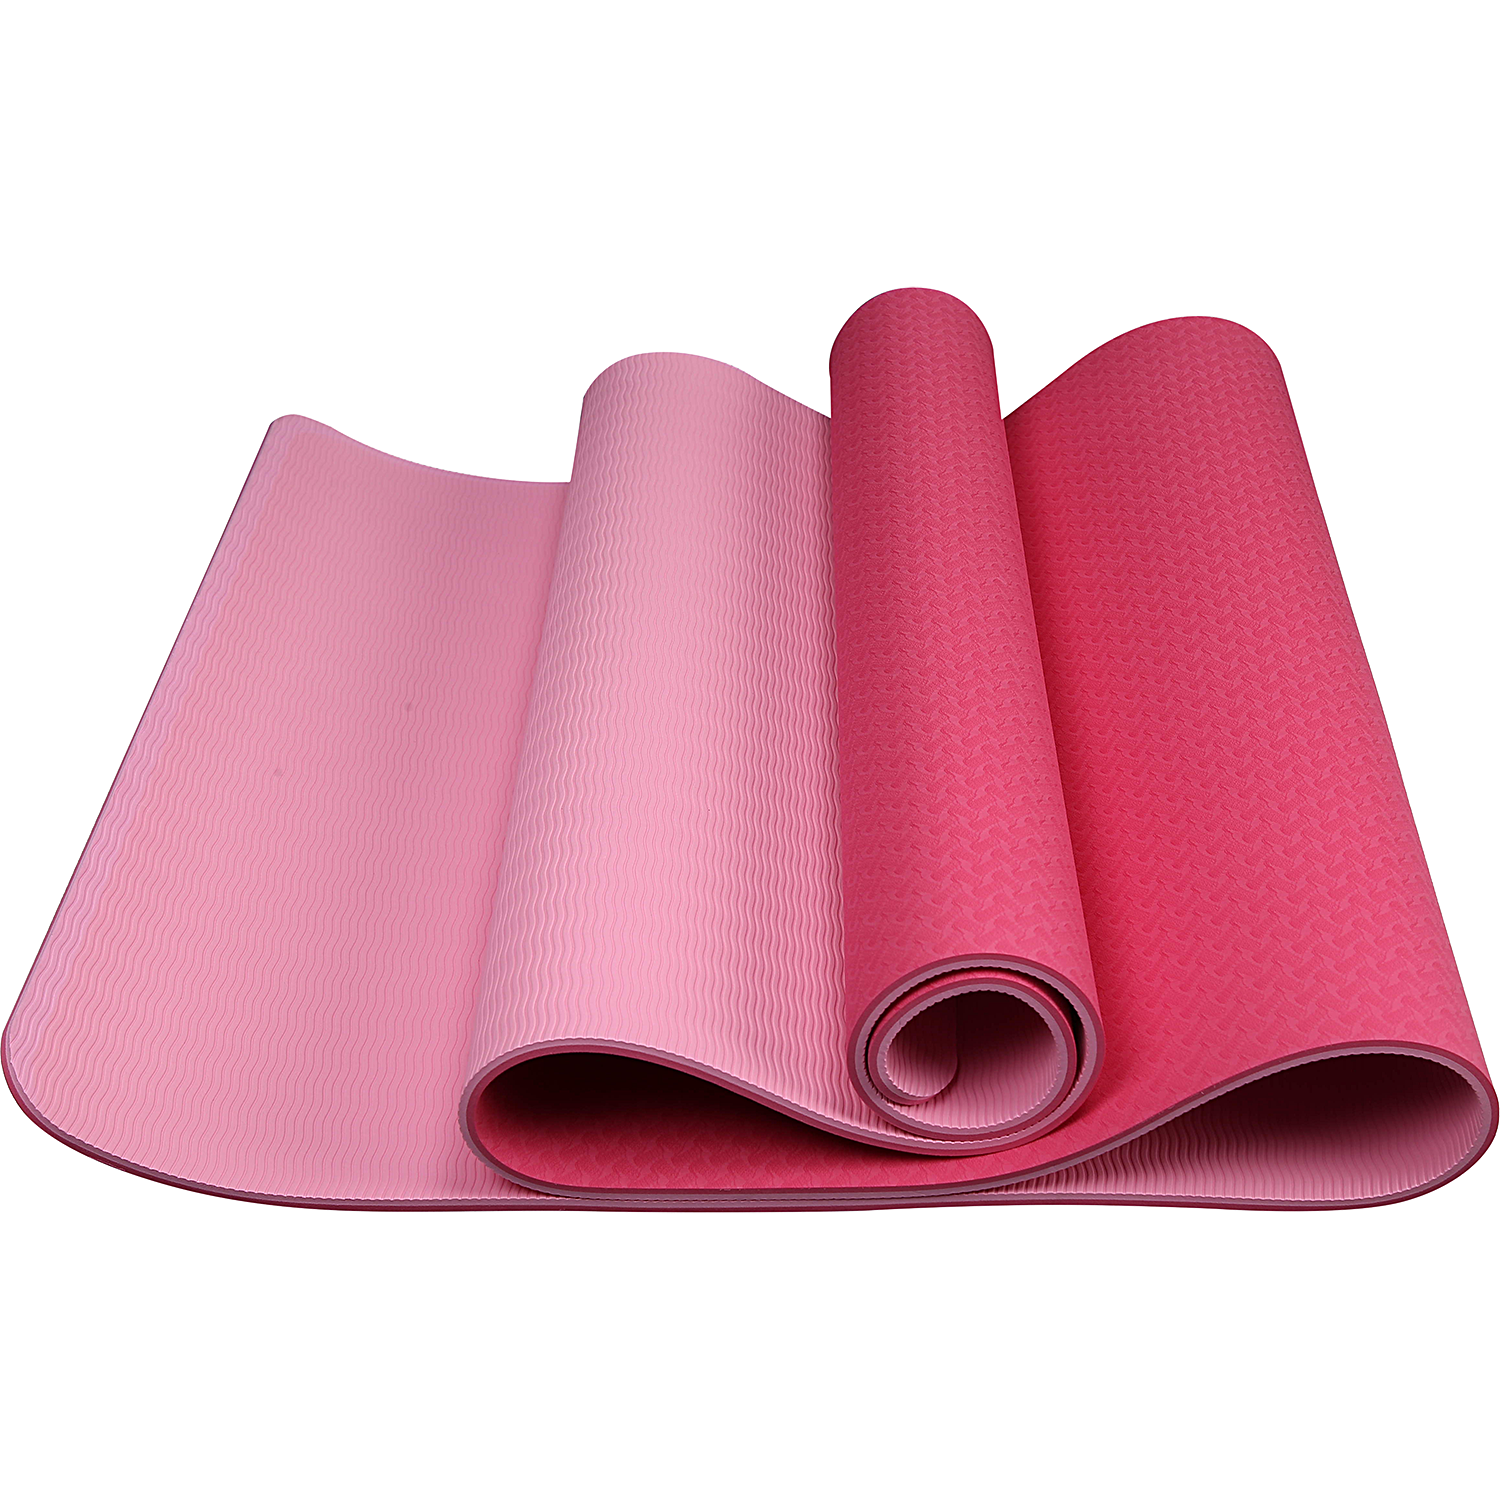  Hatha Yoga Thick TPE Yoga Mat 72x 27x1/3 inch Non Slip Eco  Friendly Exercise Mat for Yoga Pilates & Floor Workouts (black) : Sports &  Outdoors